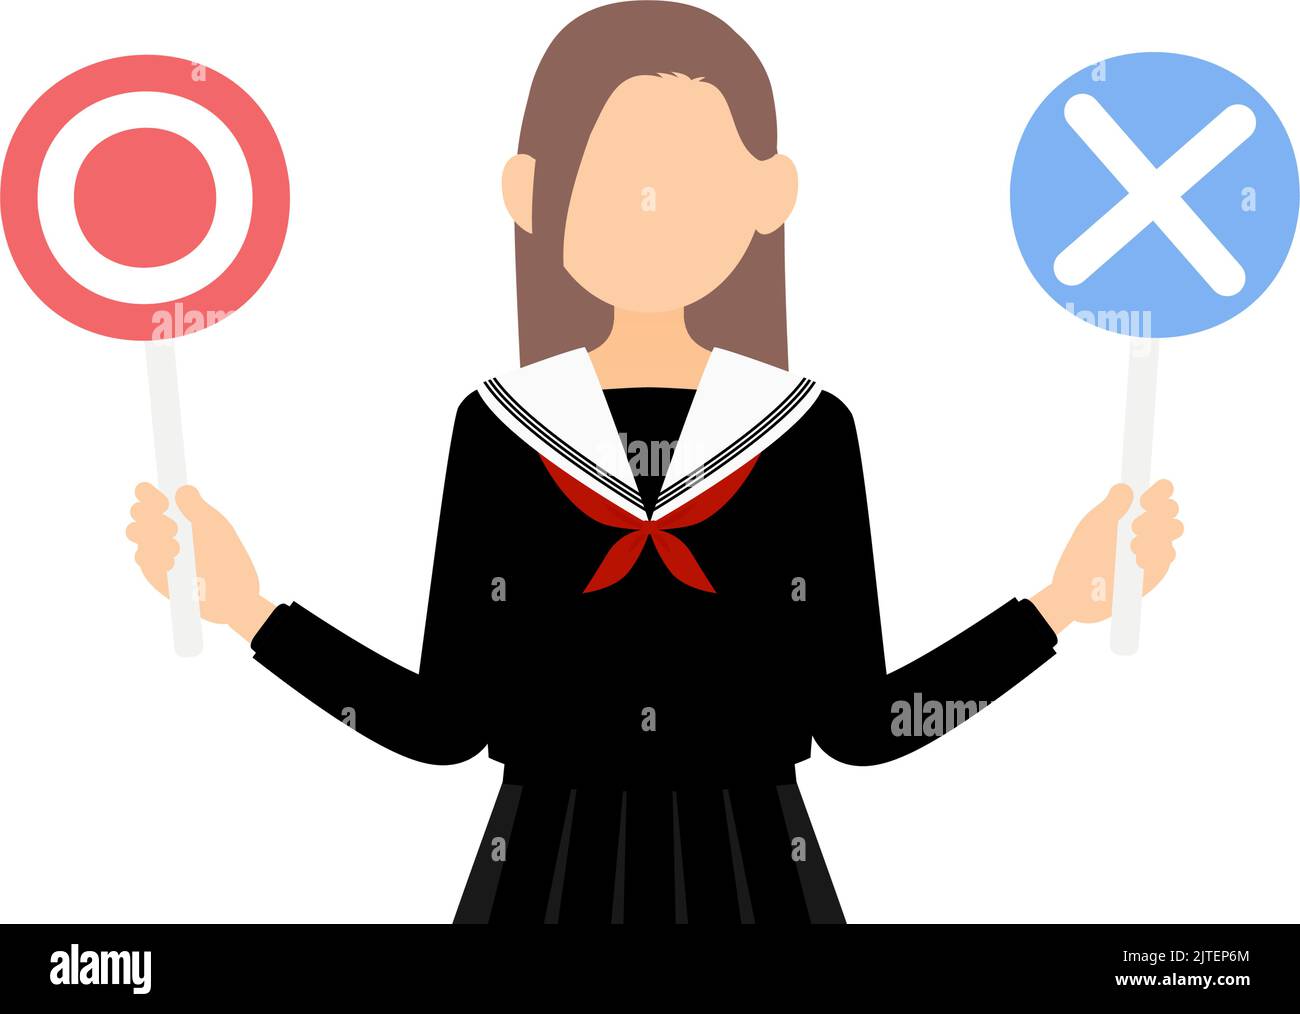 Girl wearing school sailor uniform, Have a marbled stick for answering questions. Stock Vector